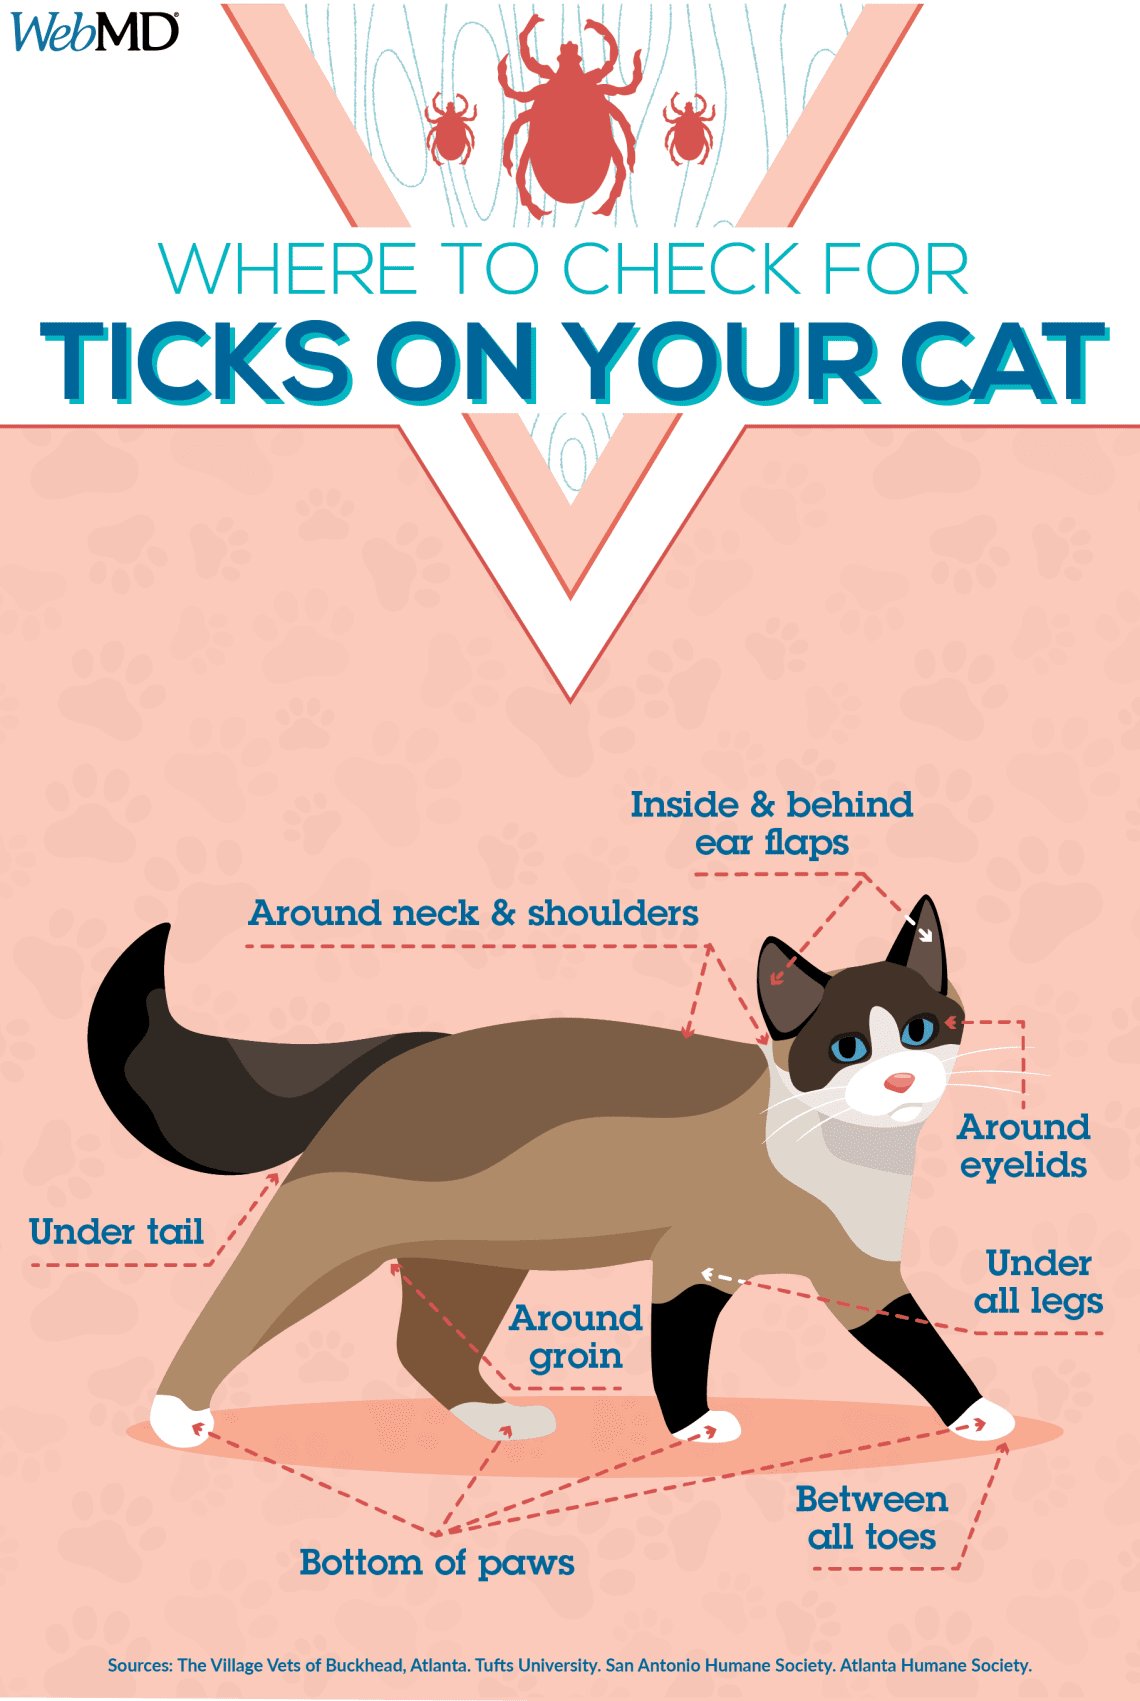 Are ticks dangerous for cats?